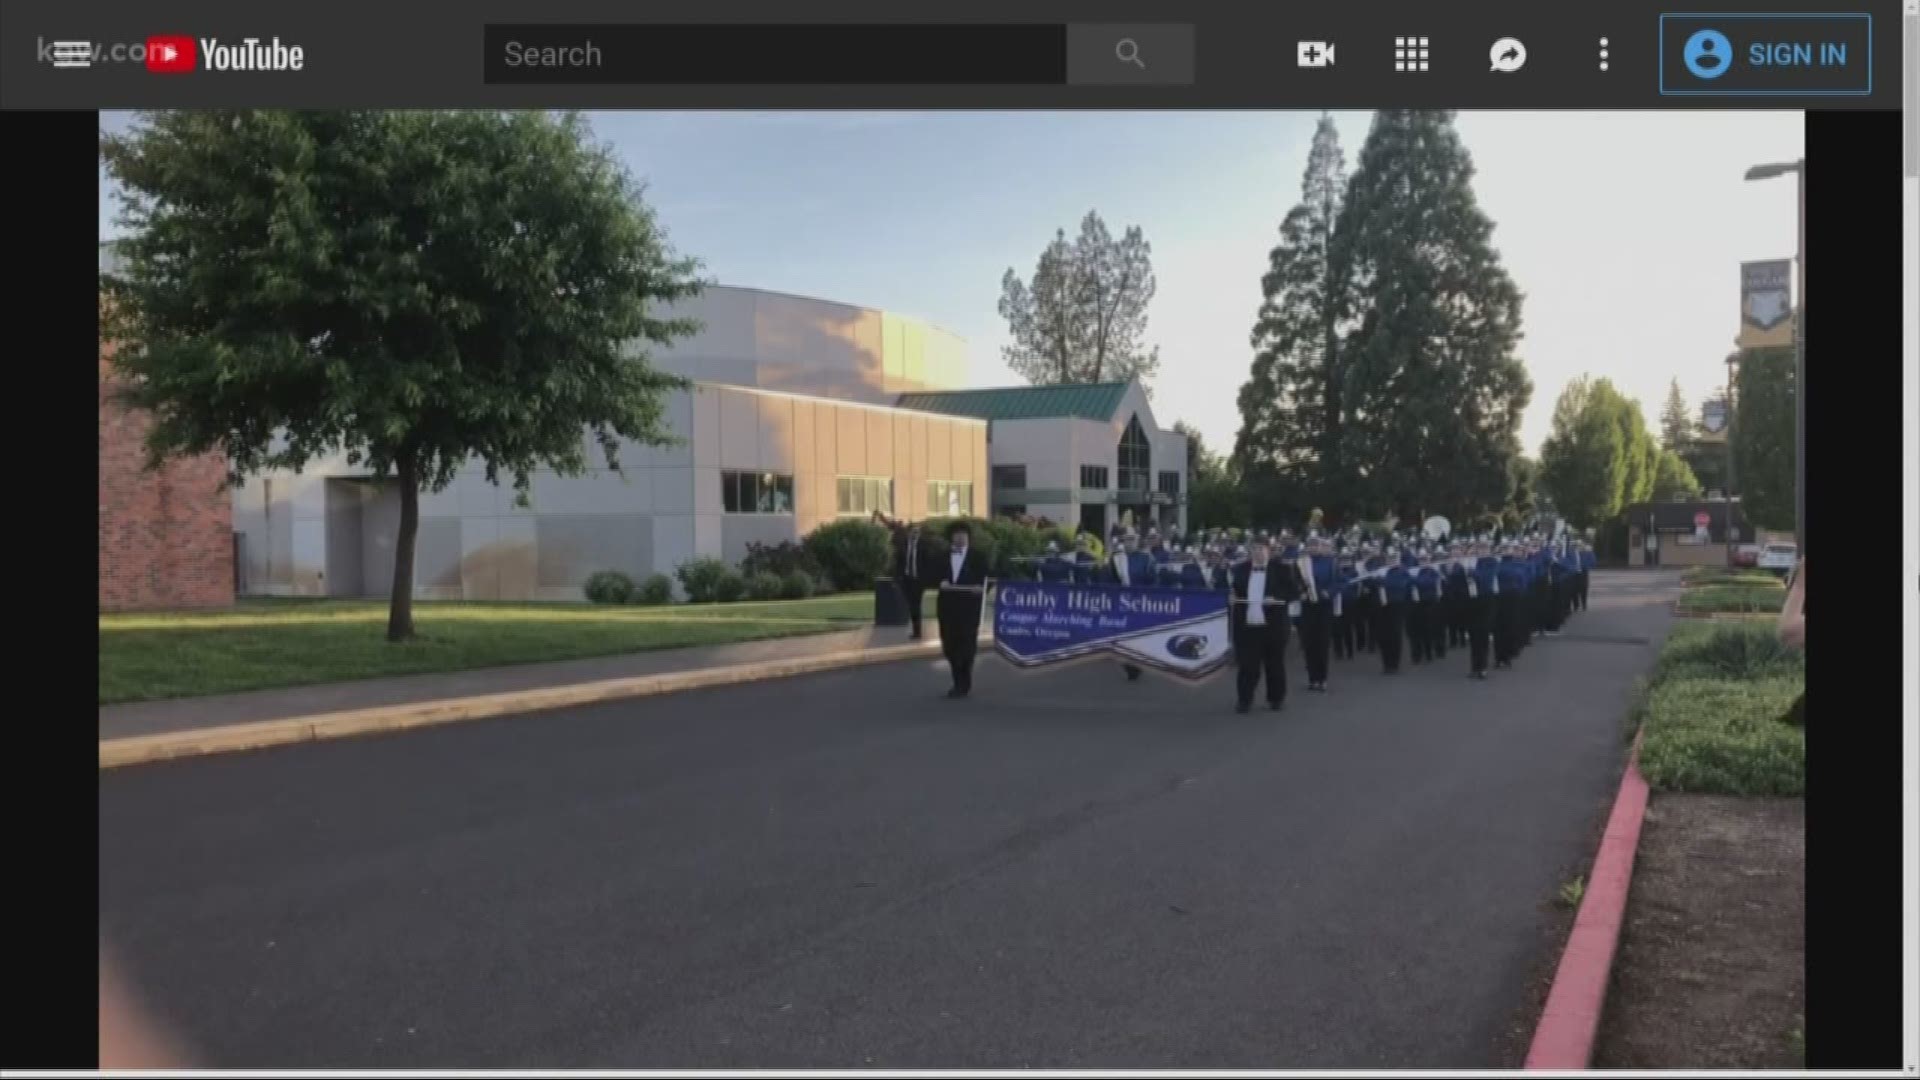 Saturday was a disappointing day for the Canby High School marching band. While the rest of the region converged on downtown Portland to watch, or march in the Starlight Parade, Canby’s band stayed at school and played all by themselves.